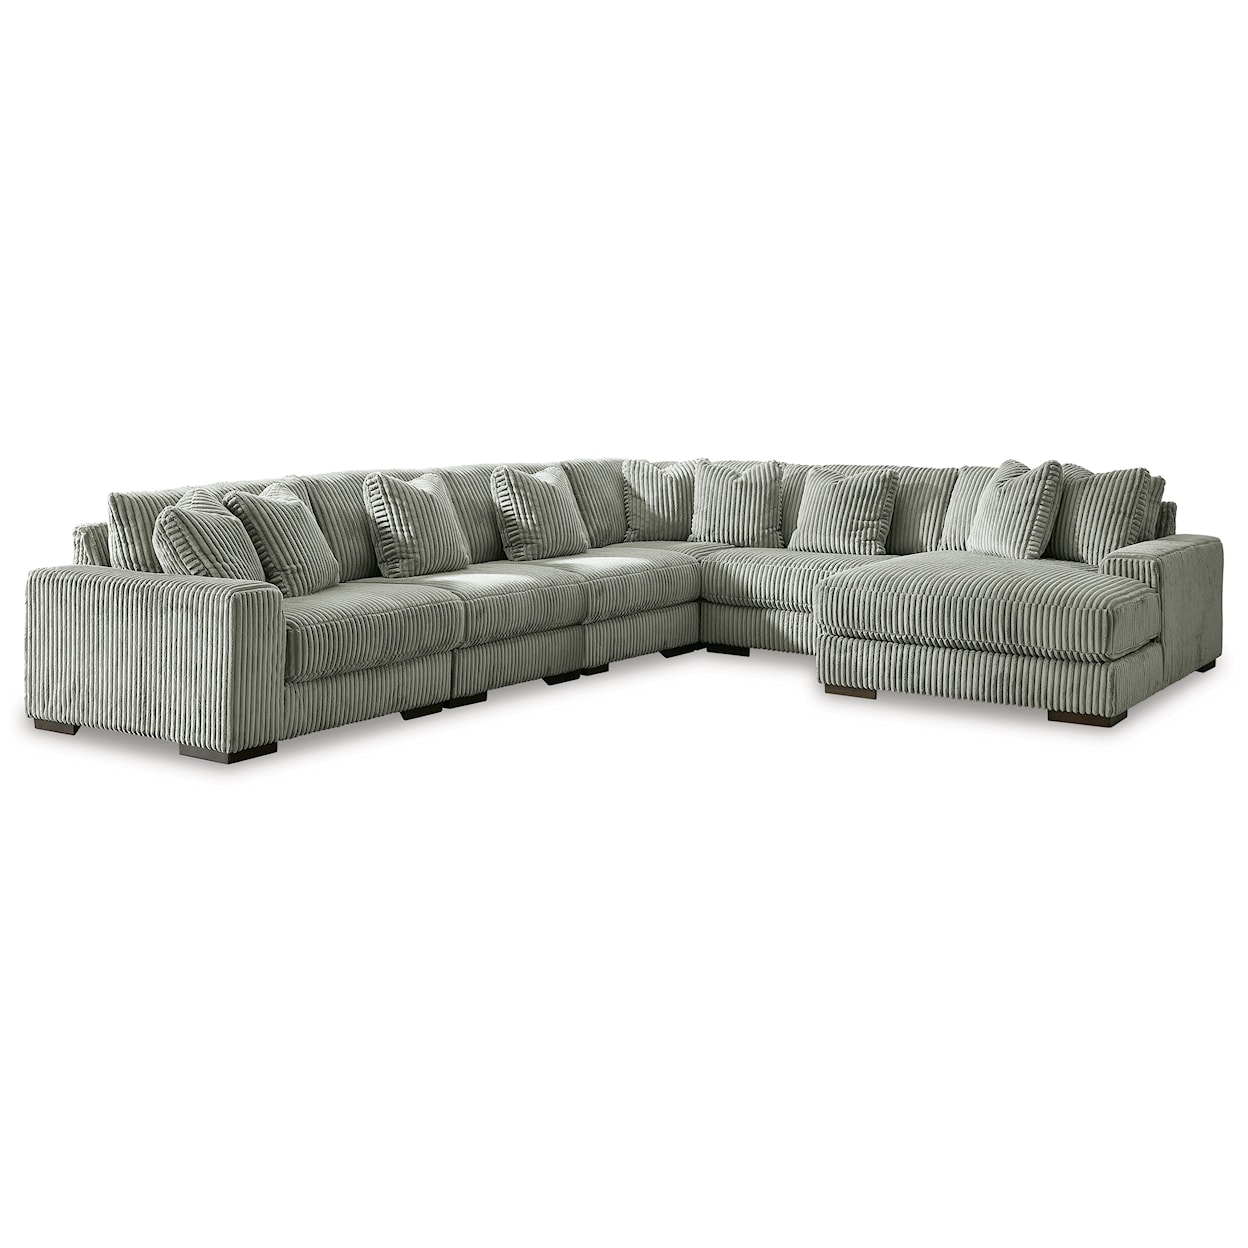 Signature Design by Ashley Furniture Lindyn 6-Piece Sectional Sofa